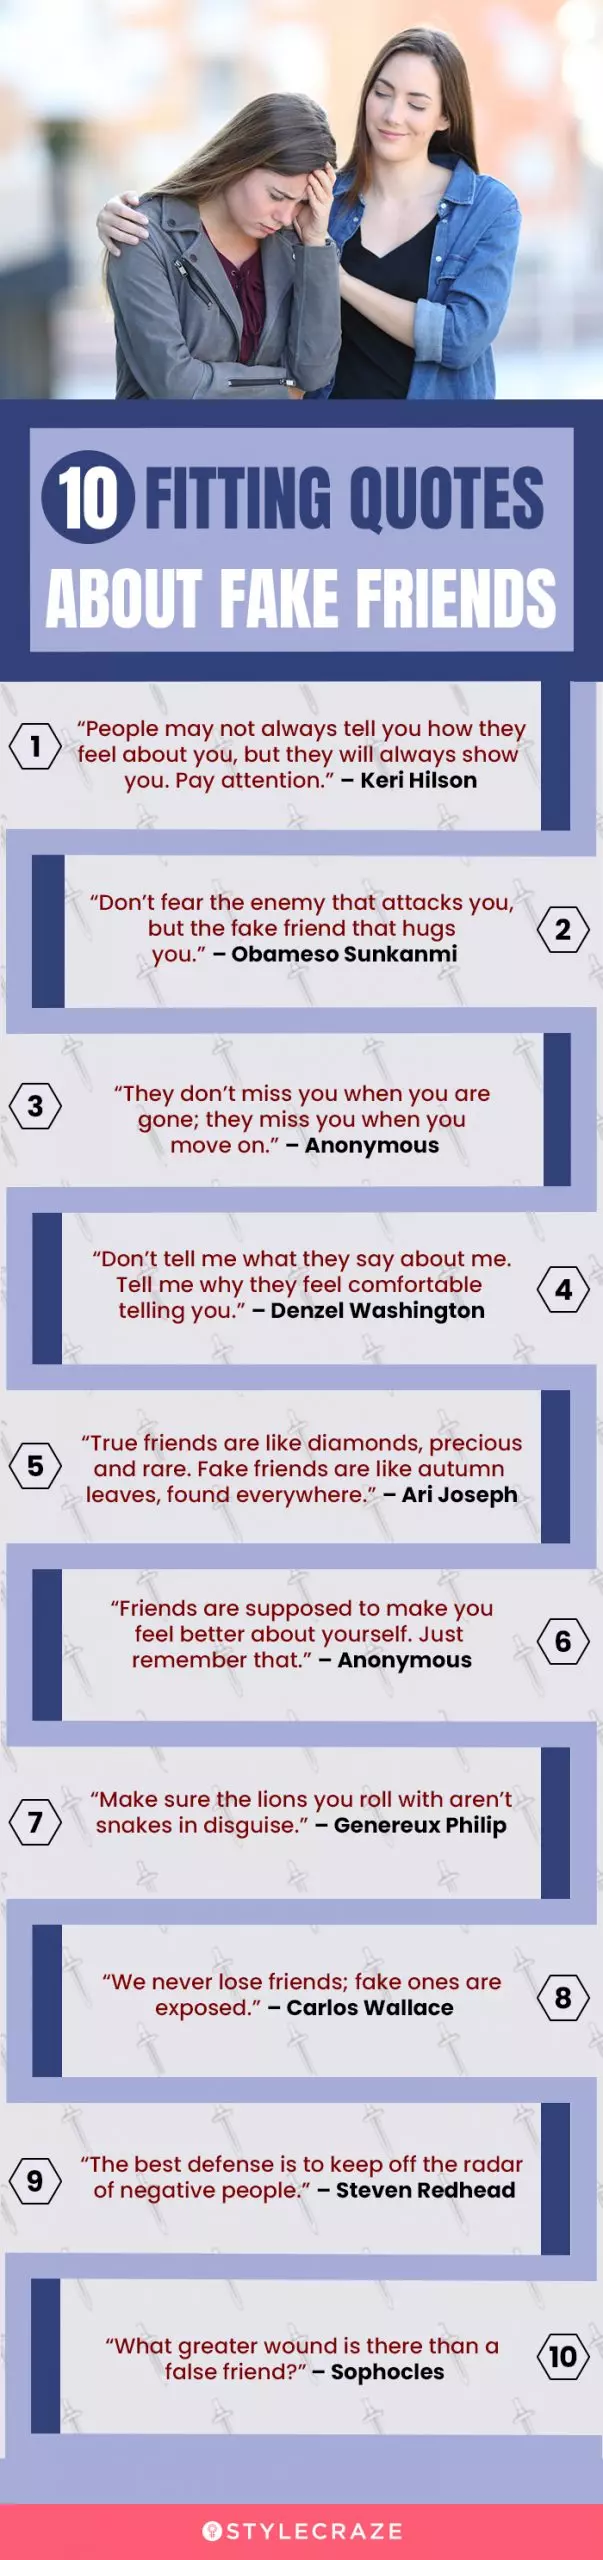 10 fitting quotes about fake friends (infographic)